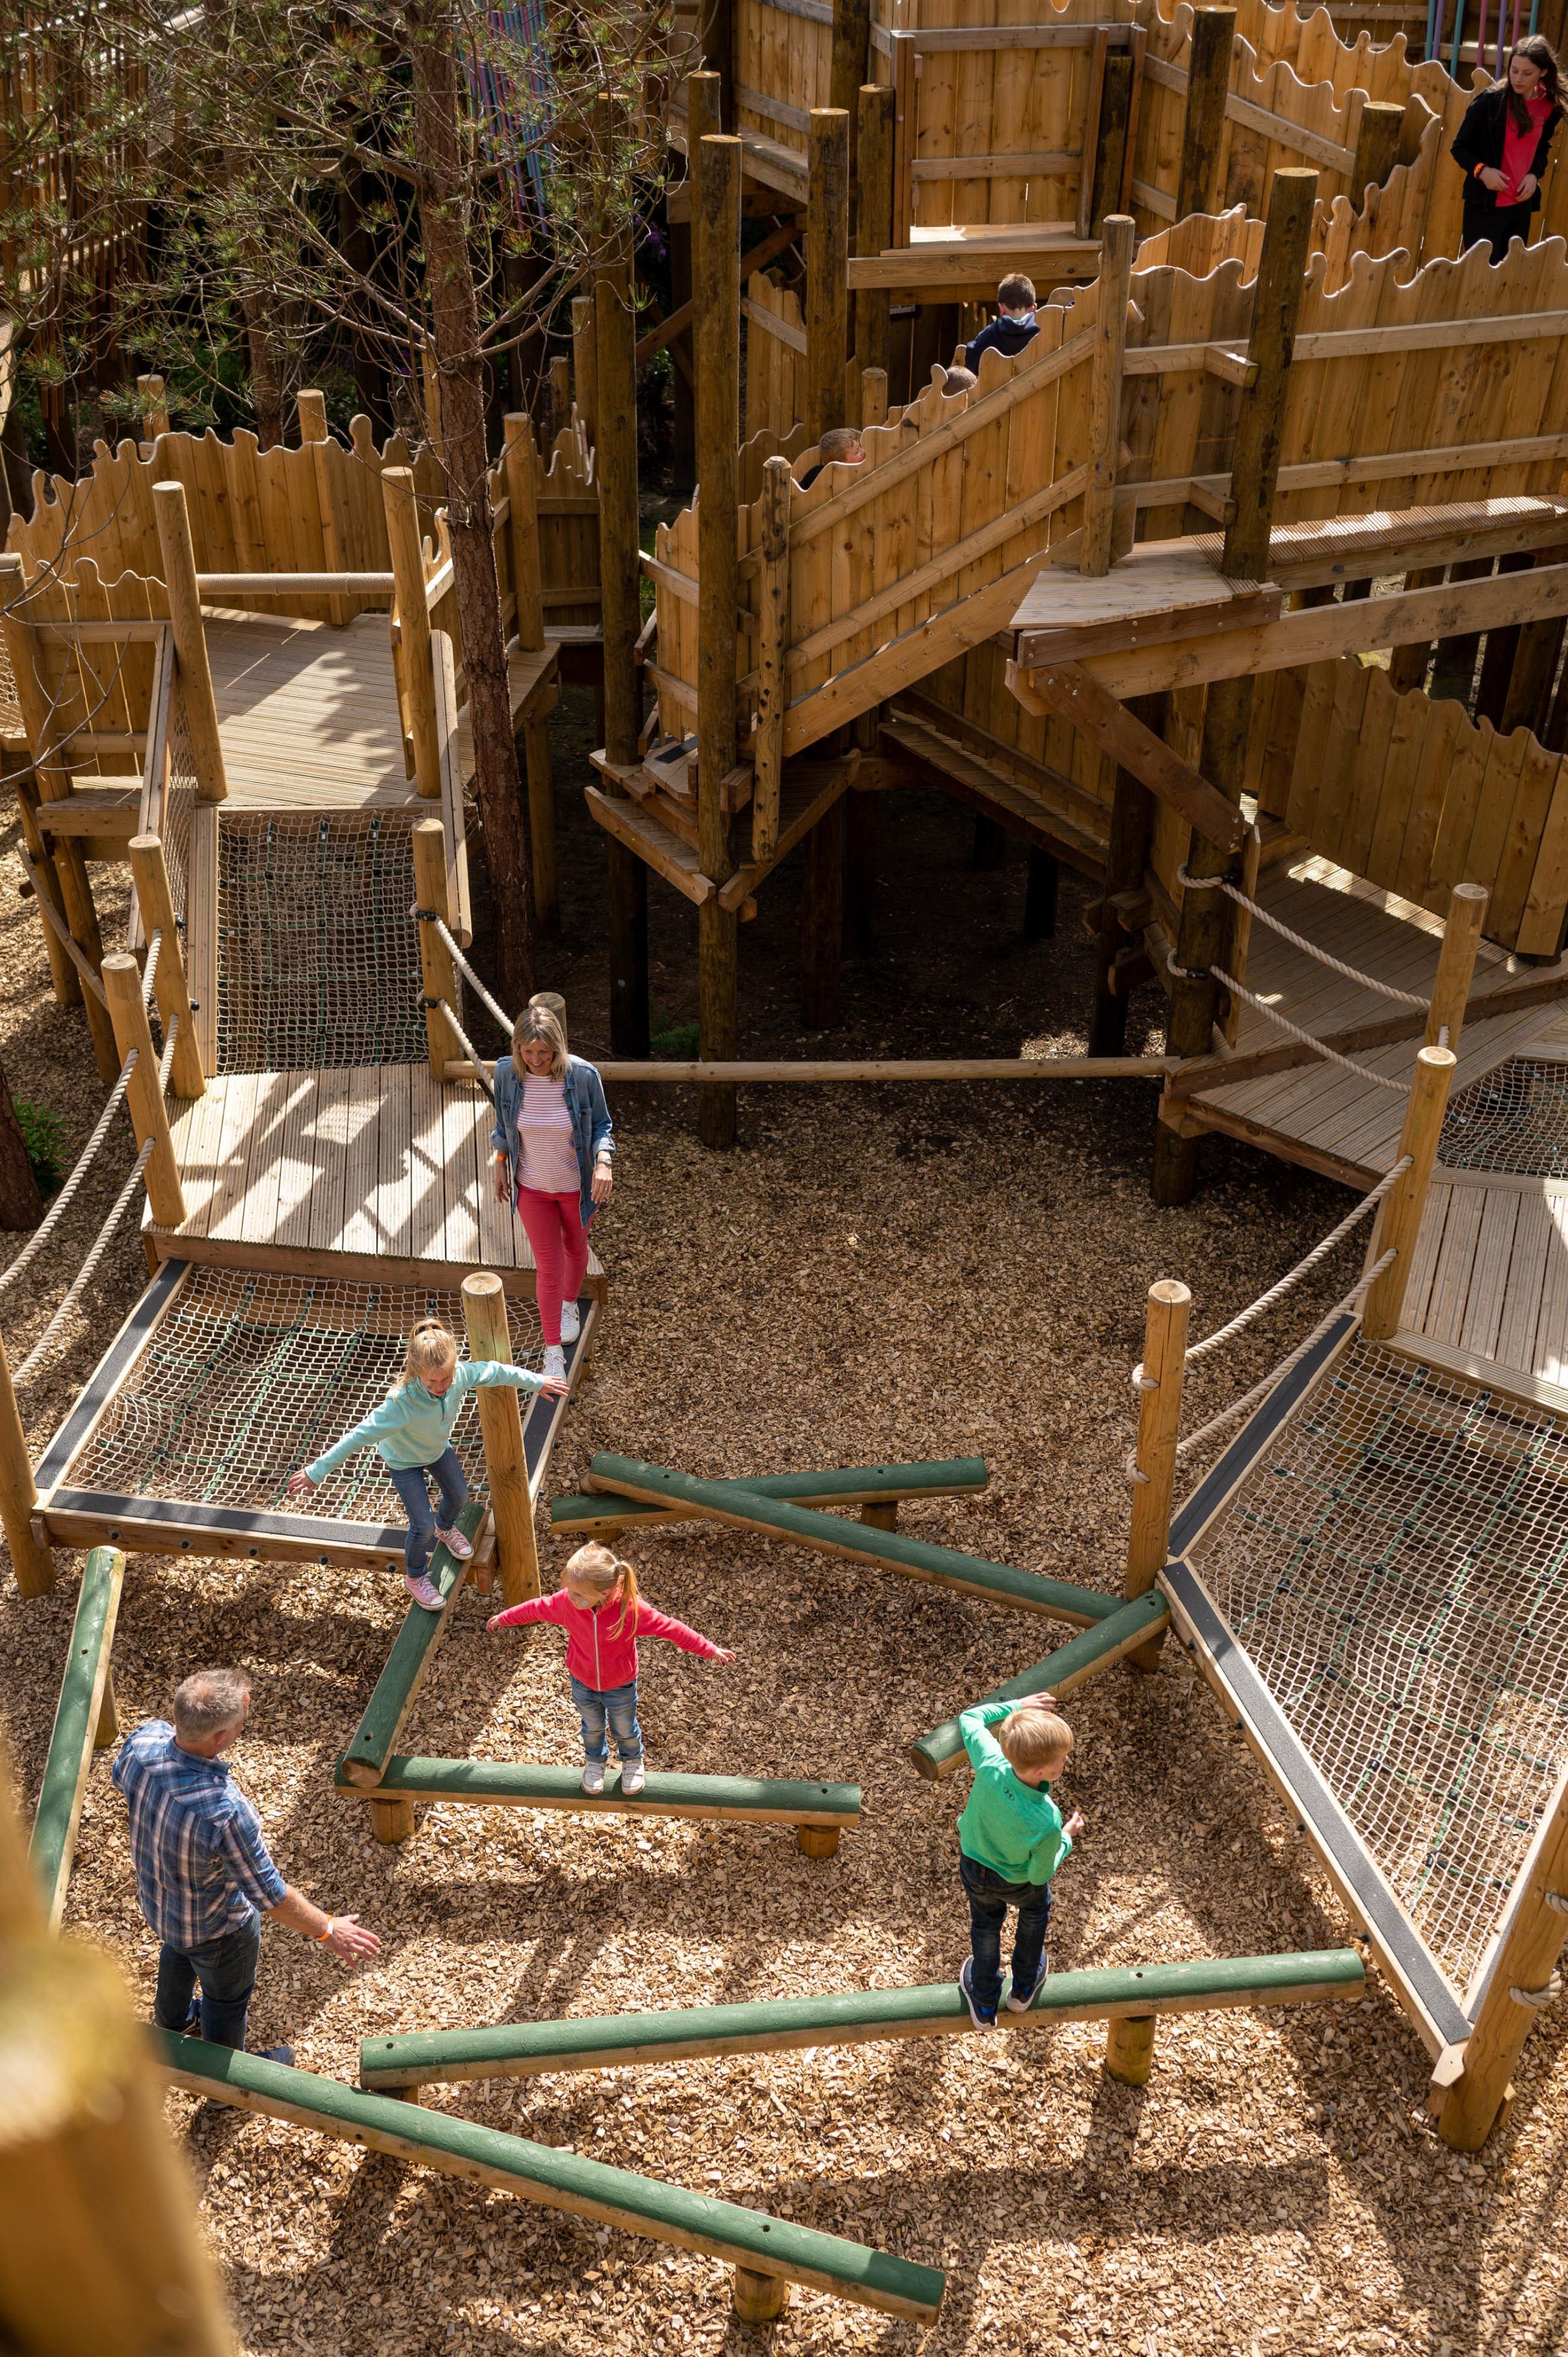 BeWILDerwood is a day full of fun and imagination